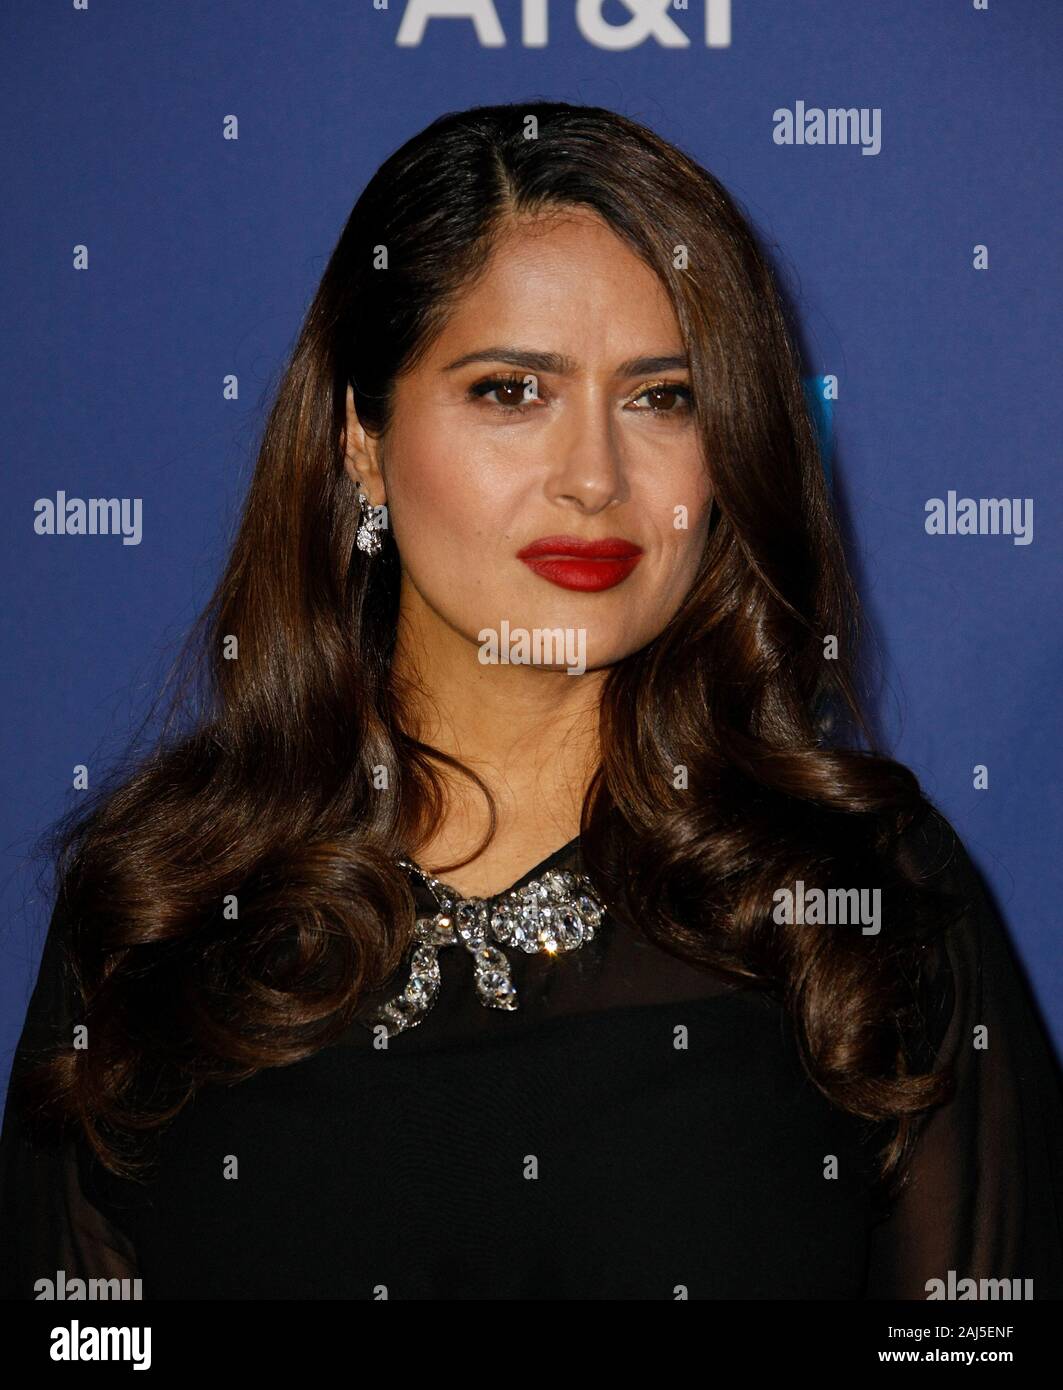 Palm Springs, California, USA. 2nd January, 2020. Salma Hayek attends the 31st Annual Palm Springs International Film Festival Film Awards Gala at Palm Springs Convention Center on January 02, 2020 in Palm Springs, California. Photo: CraSH/imageSPACE/MediaPunch Credit: MediaPunch Inc/Alamy Live News Stock Photo